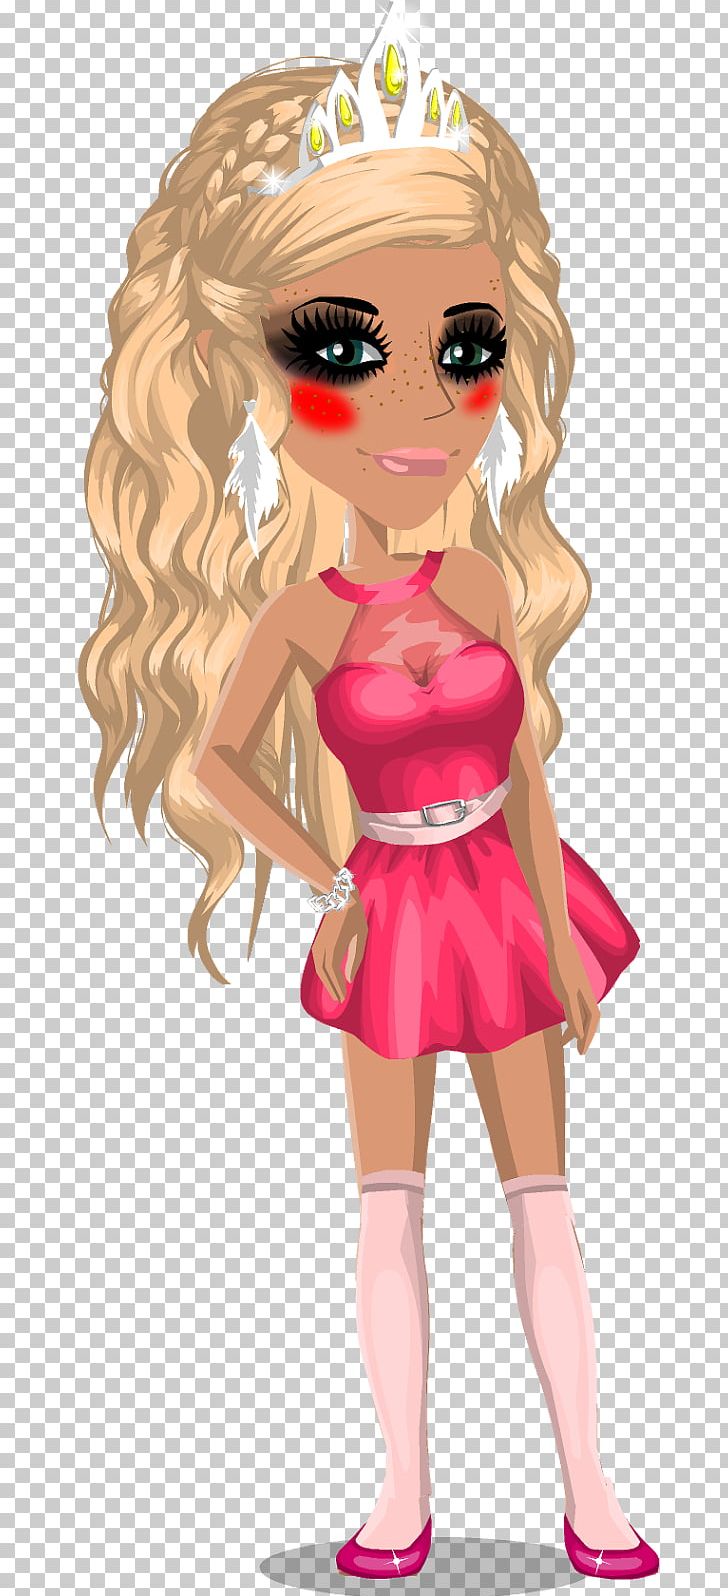 MovieStarPlanet YouTube Long Hair Brown Hair Character PNG, Clipart, Anime, Barbie, Blond, Brown Hair, Cartoon Free PNG Download